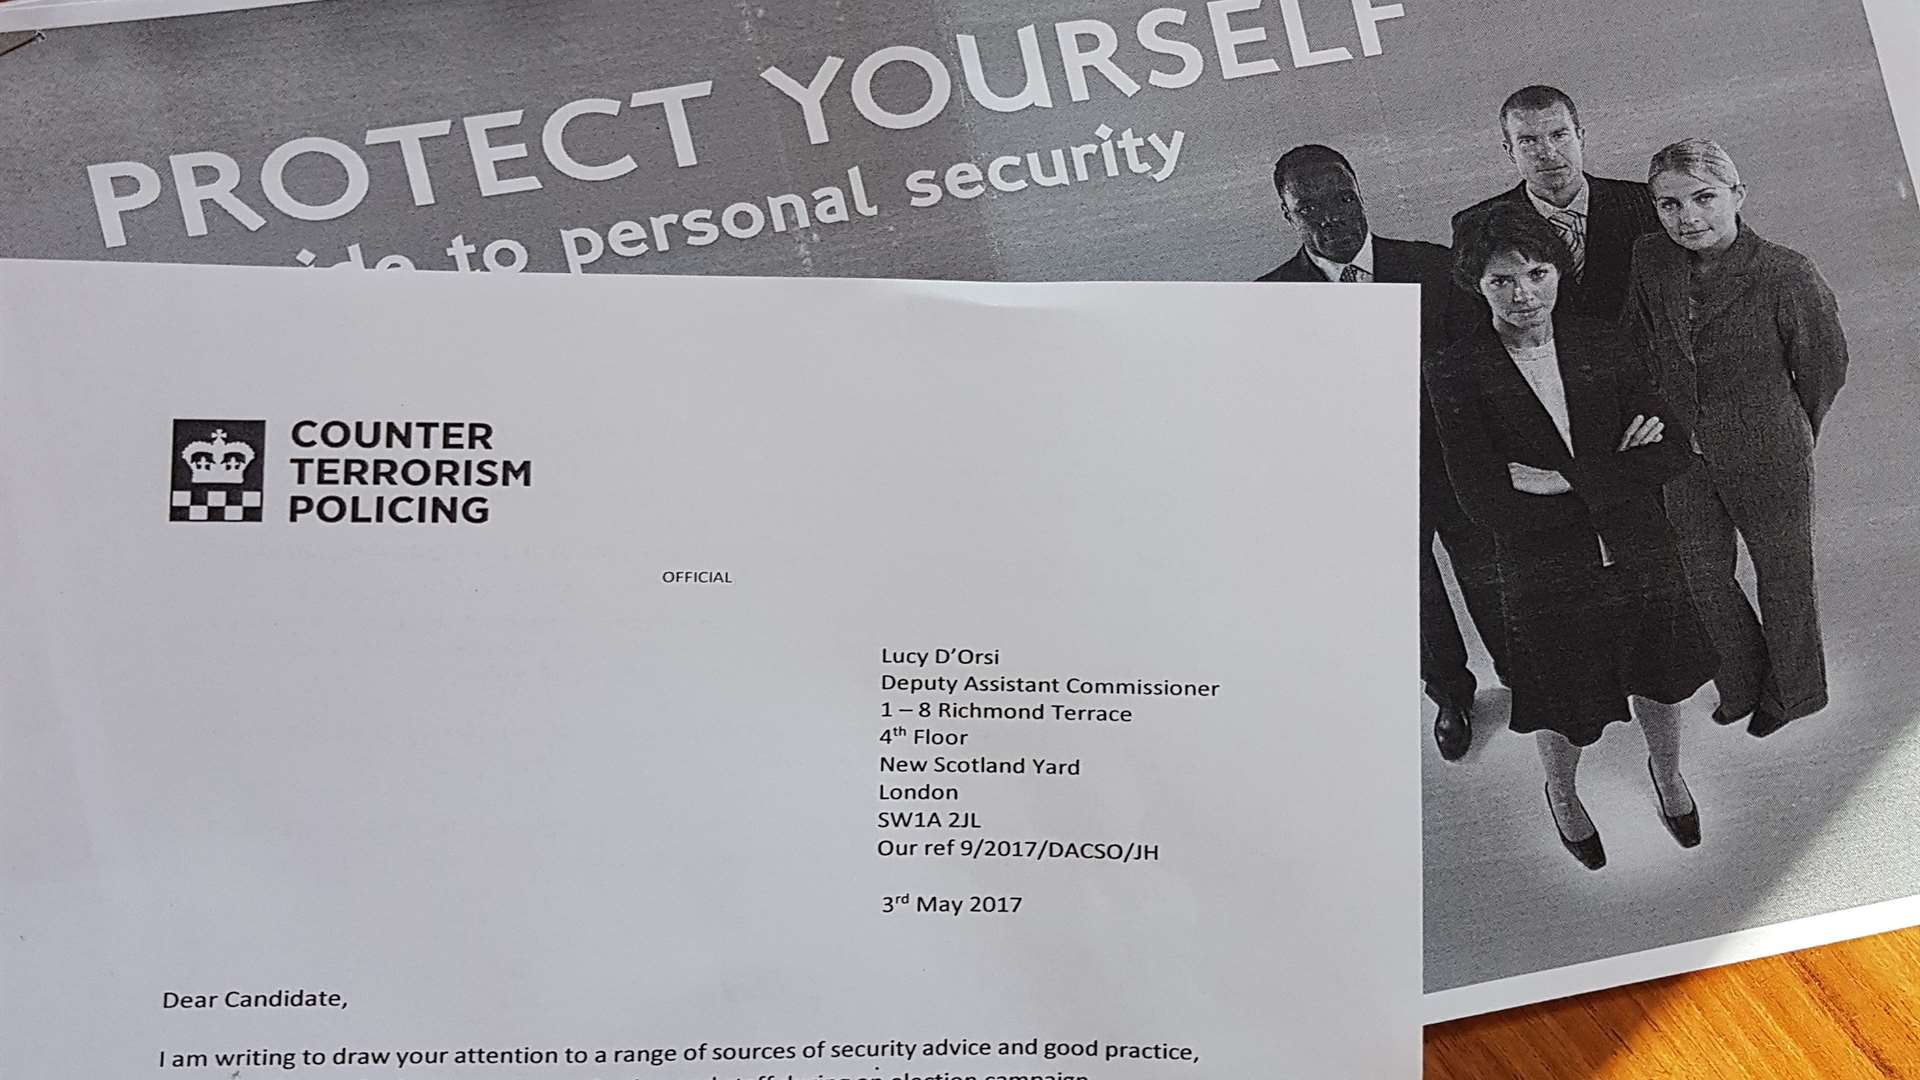 The security guidance letter received by parliamentary candidates